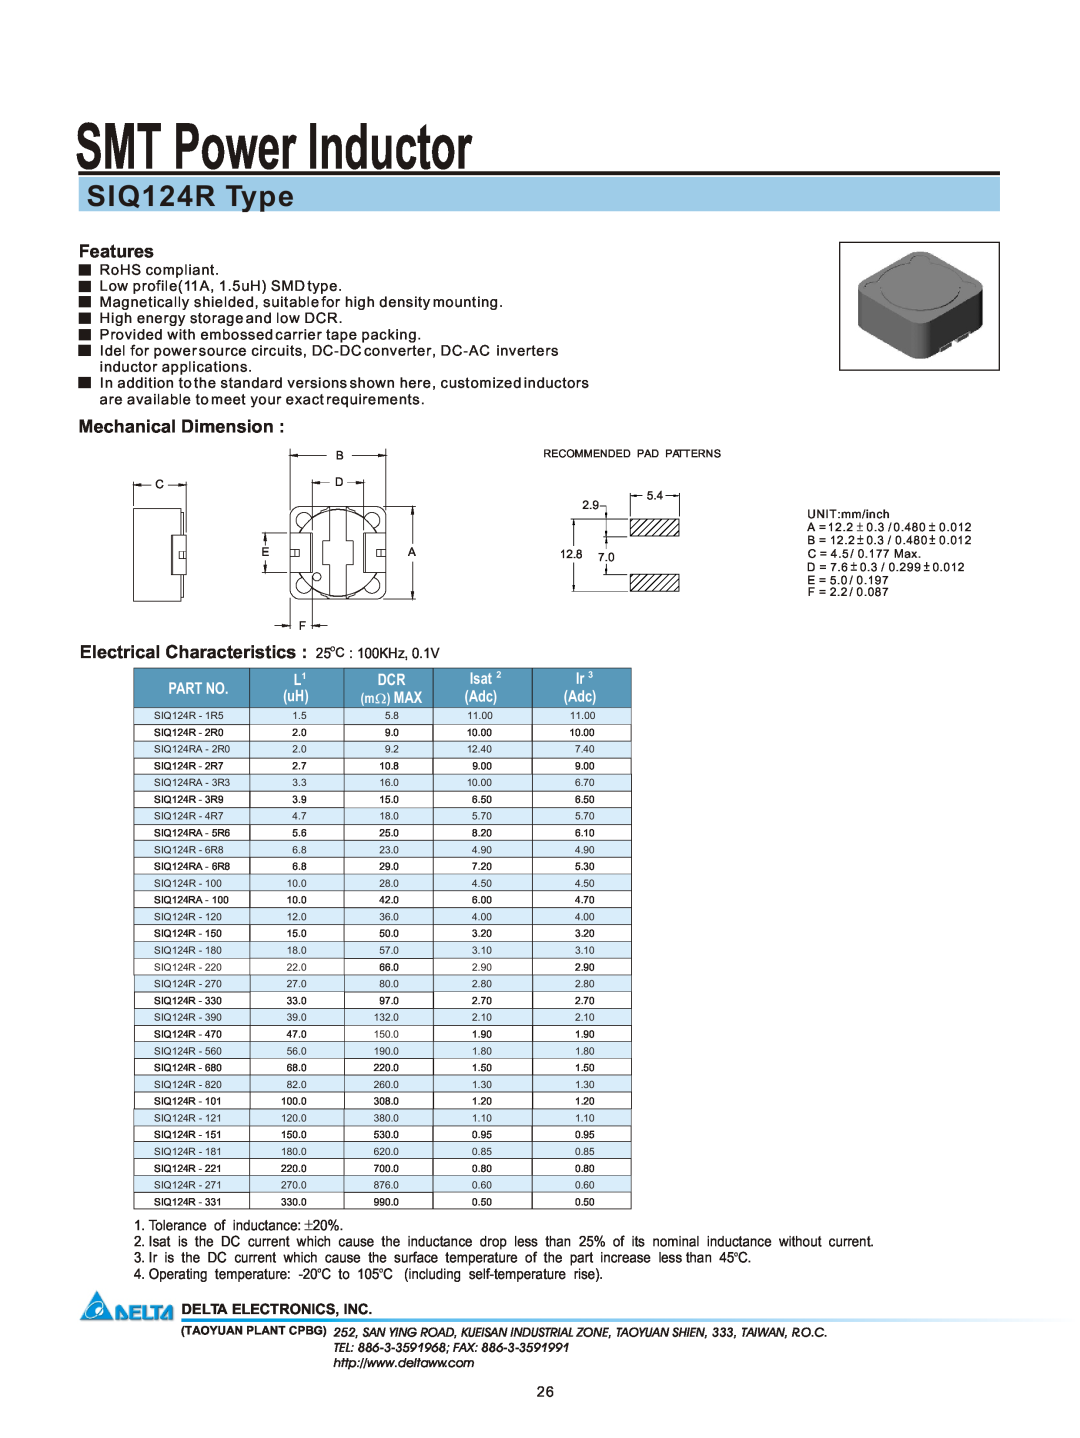 Delta Electronics manual SMT Power Inductor, SIQ124R Type, Features, Mechanical Dimension, Isat, Delta Electronics, Inc 